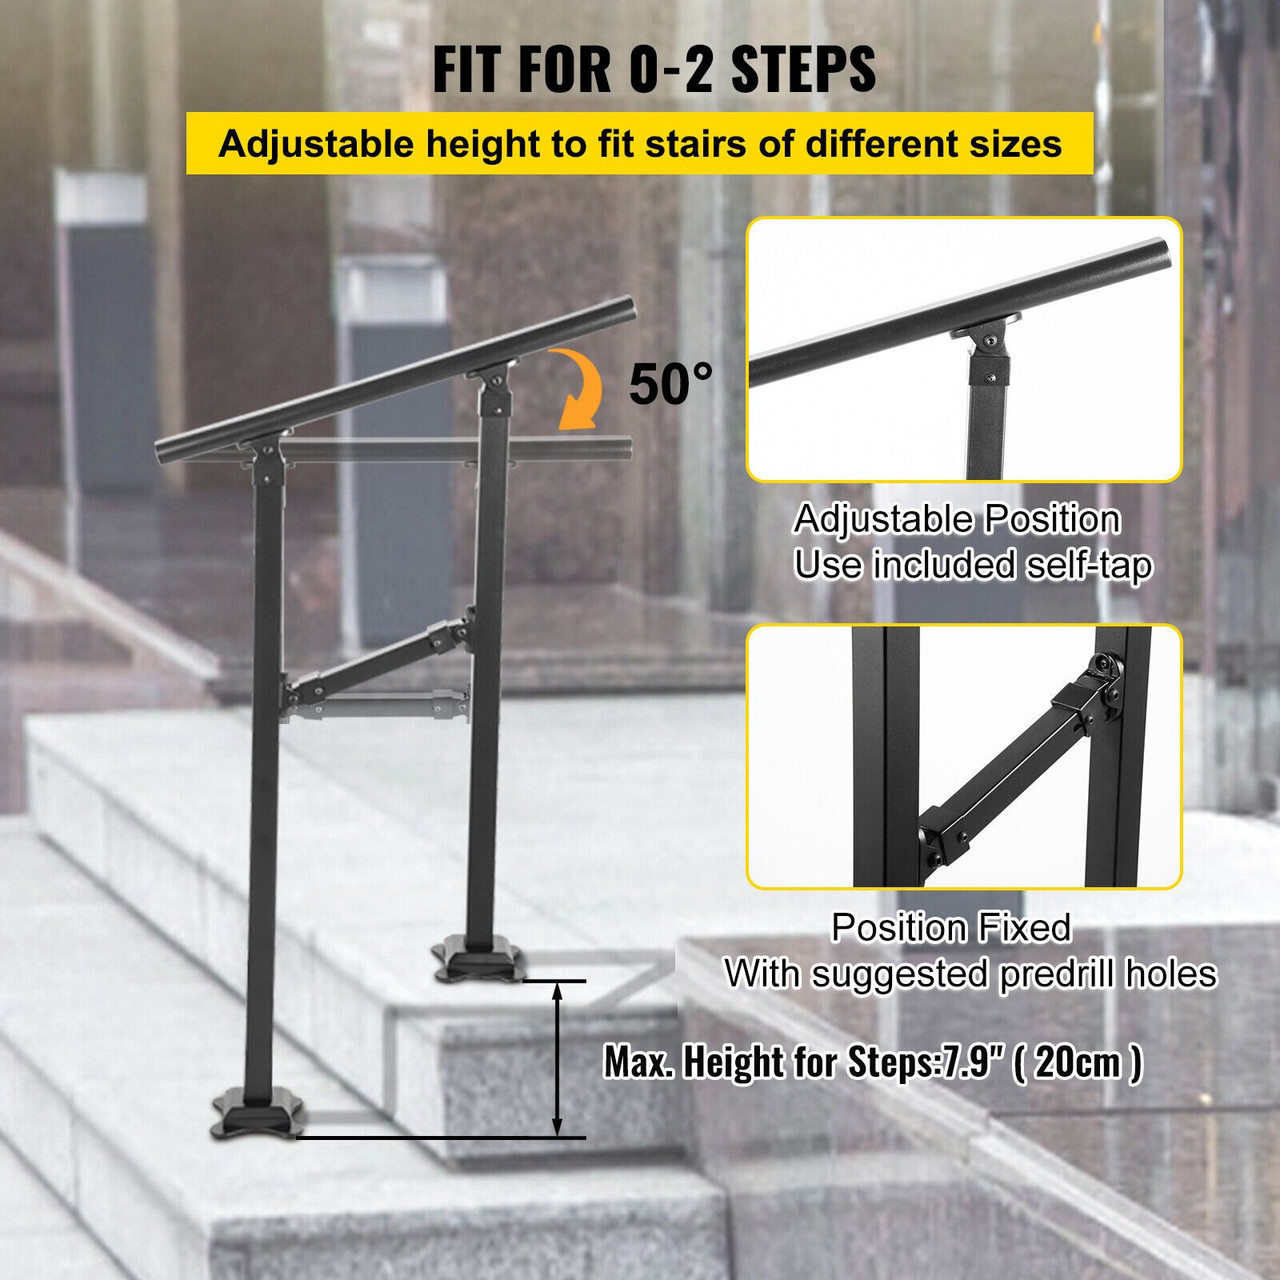 Outdoor Stair Railing, Fits for 0-2 Step Transitional Wrought Iron Handrail, Adjustable Exterior Stair Railing, Handrails for Concrete Steps with Installation Kit, Matte Black Outdoor Handrail